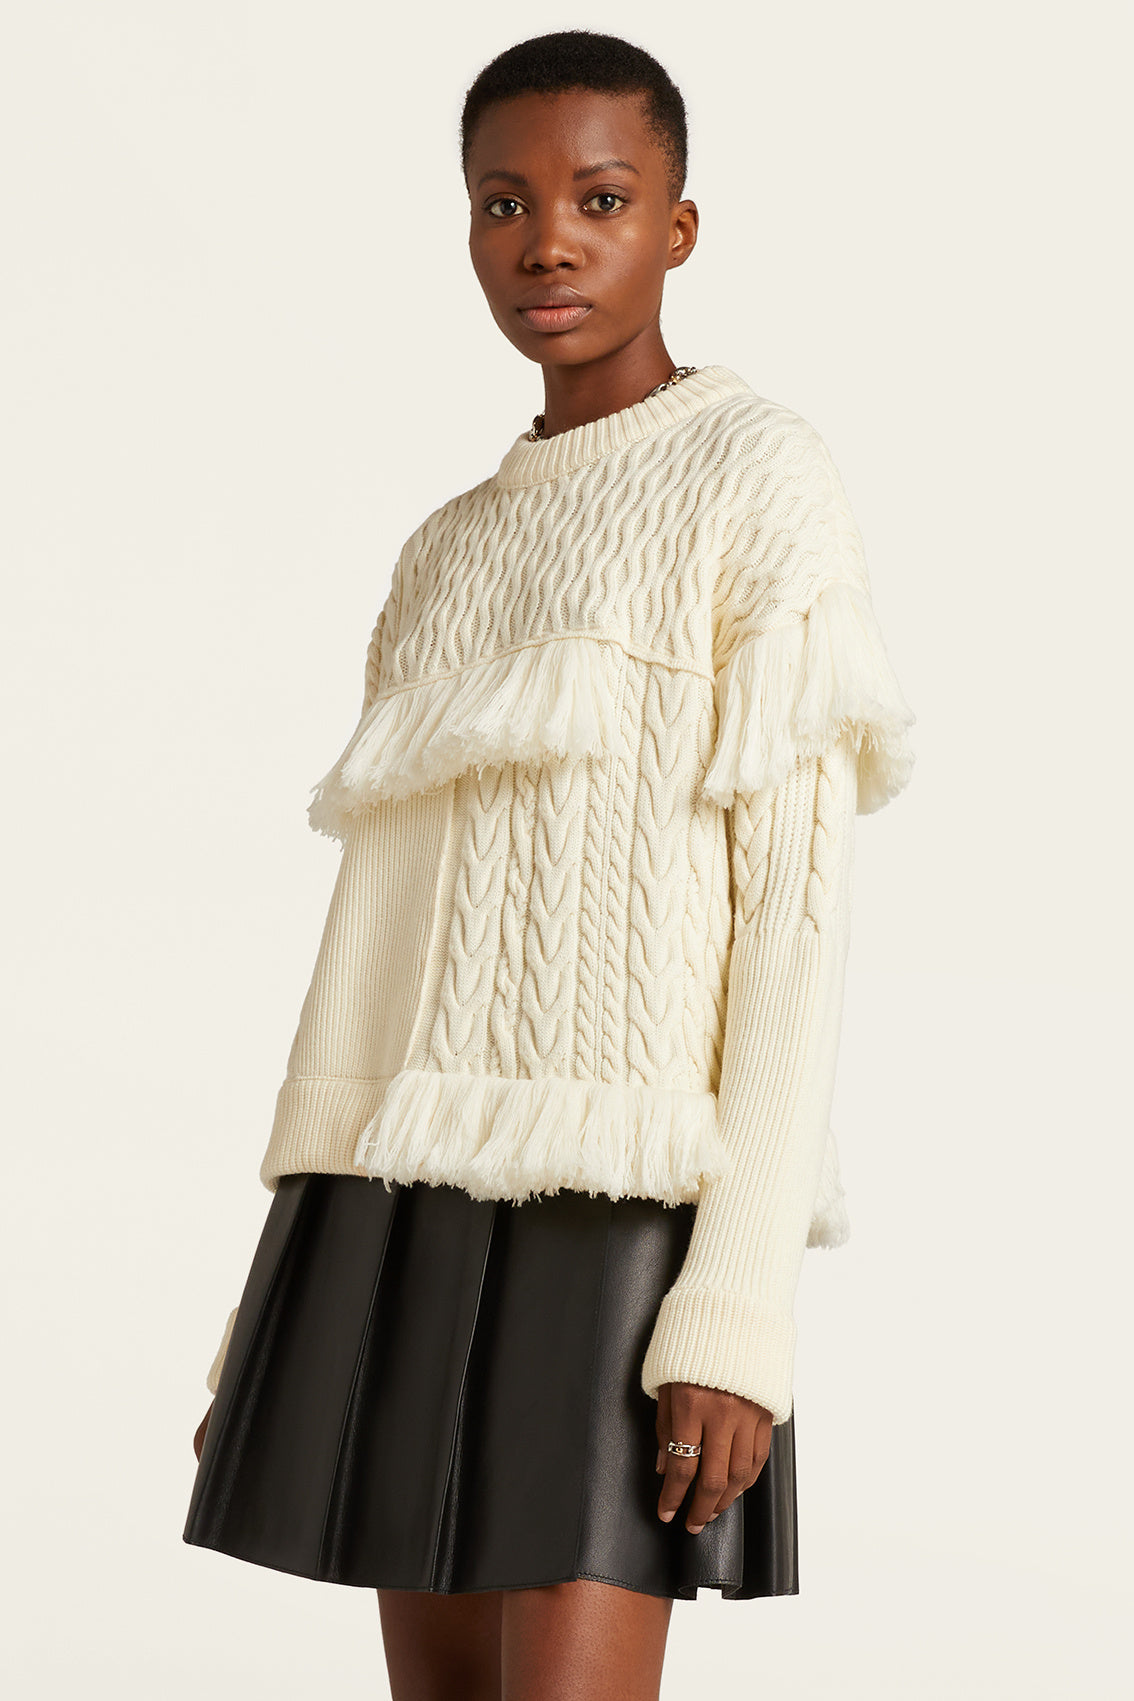 Abstract-Knit-Top-with-Fringe | Knitwear | PORTS 1961 – Ports1961